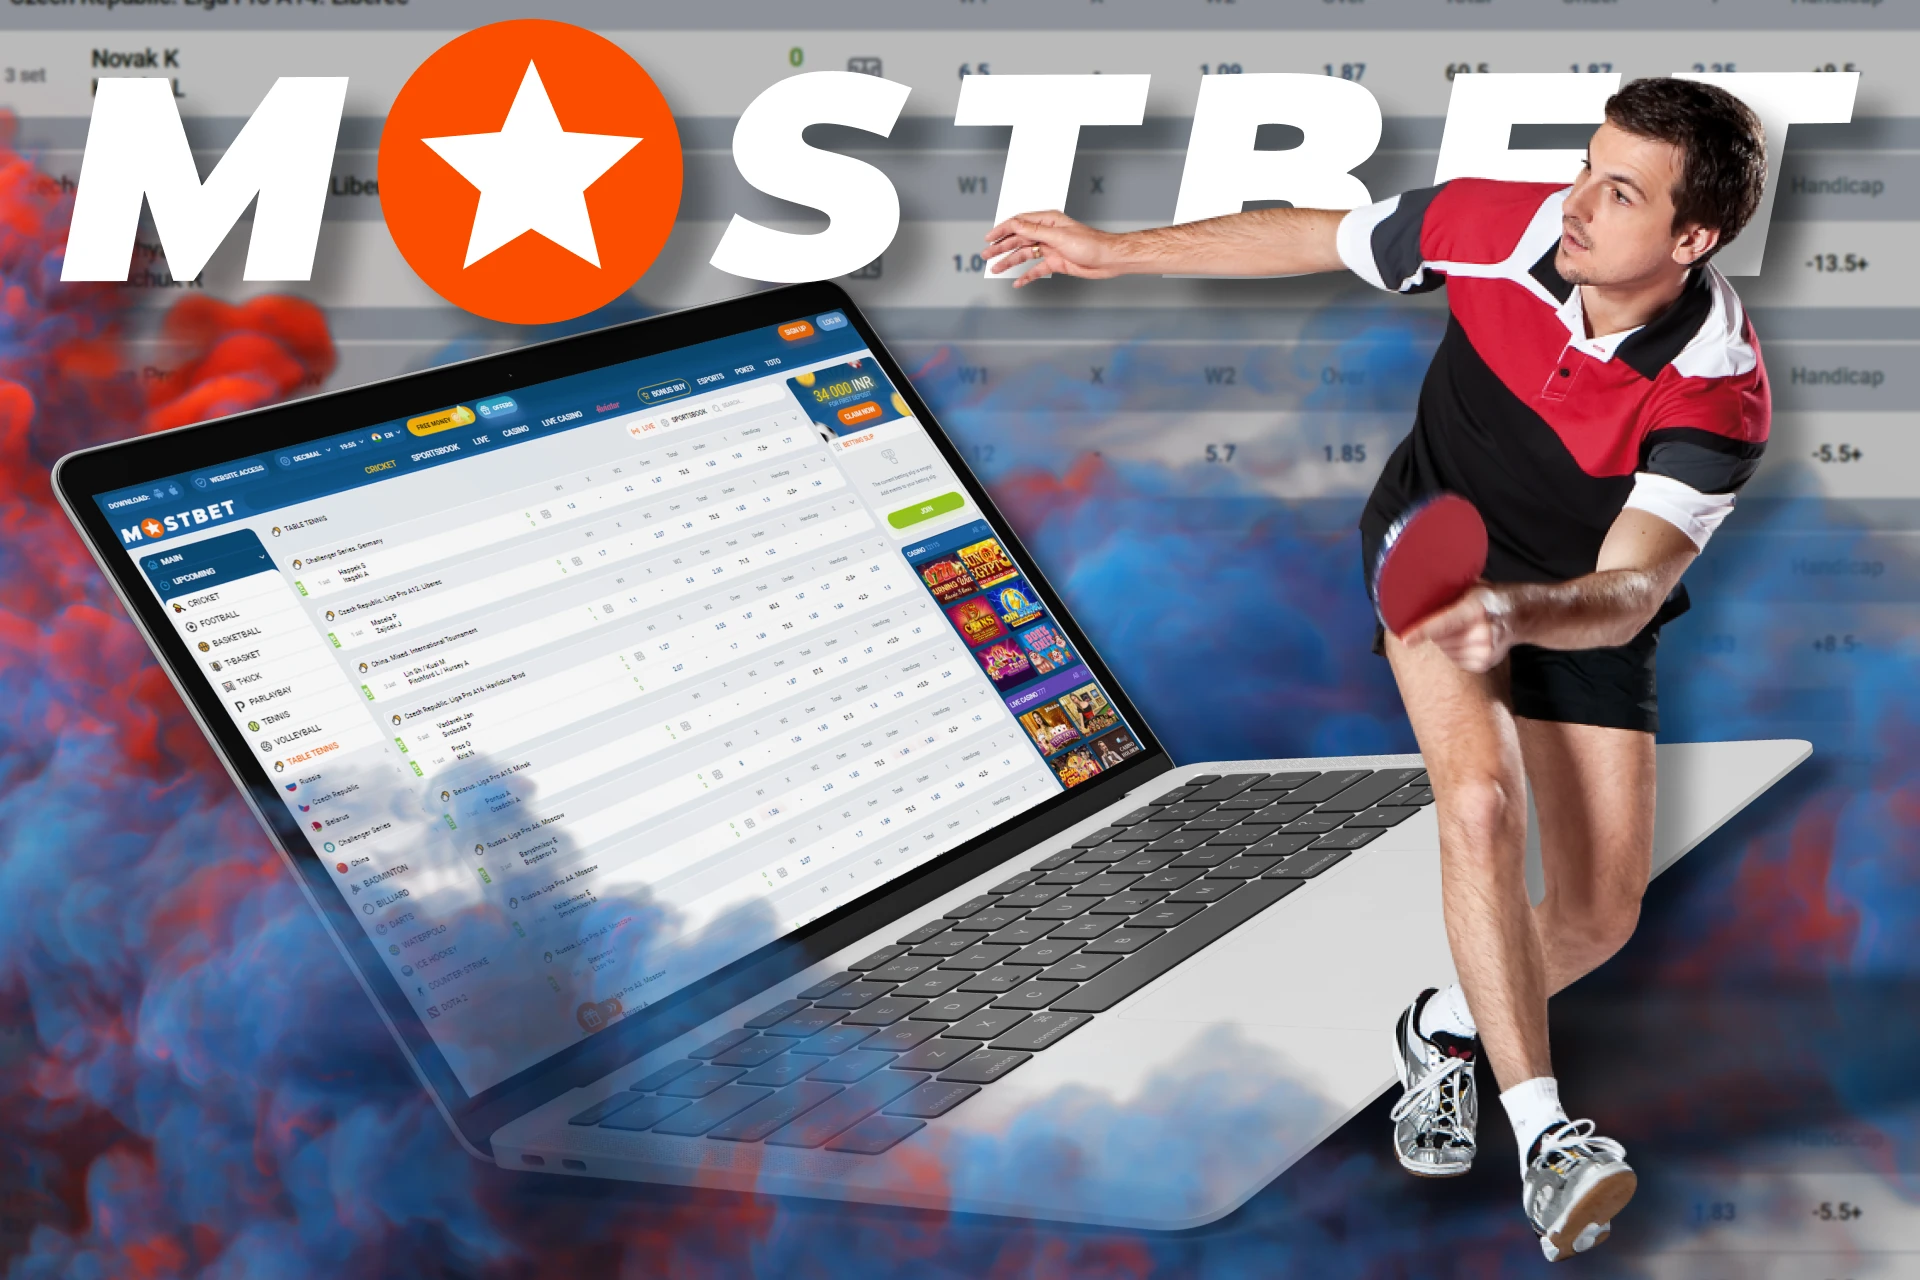 At Mostbet, use these tips to win bets on Table Tennis.